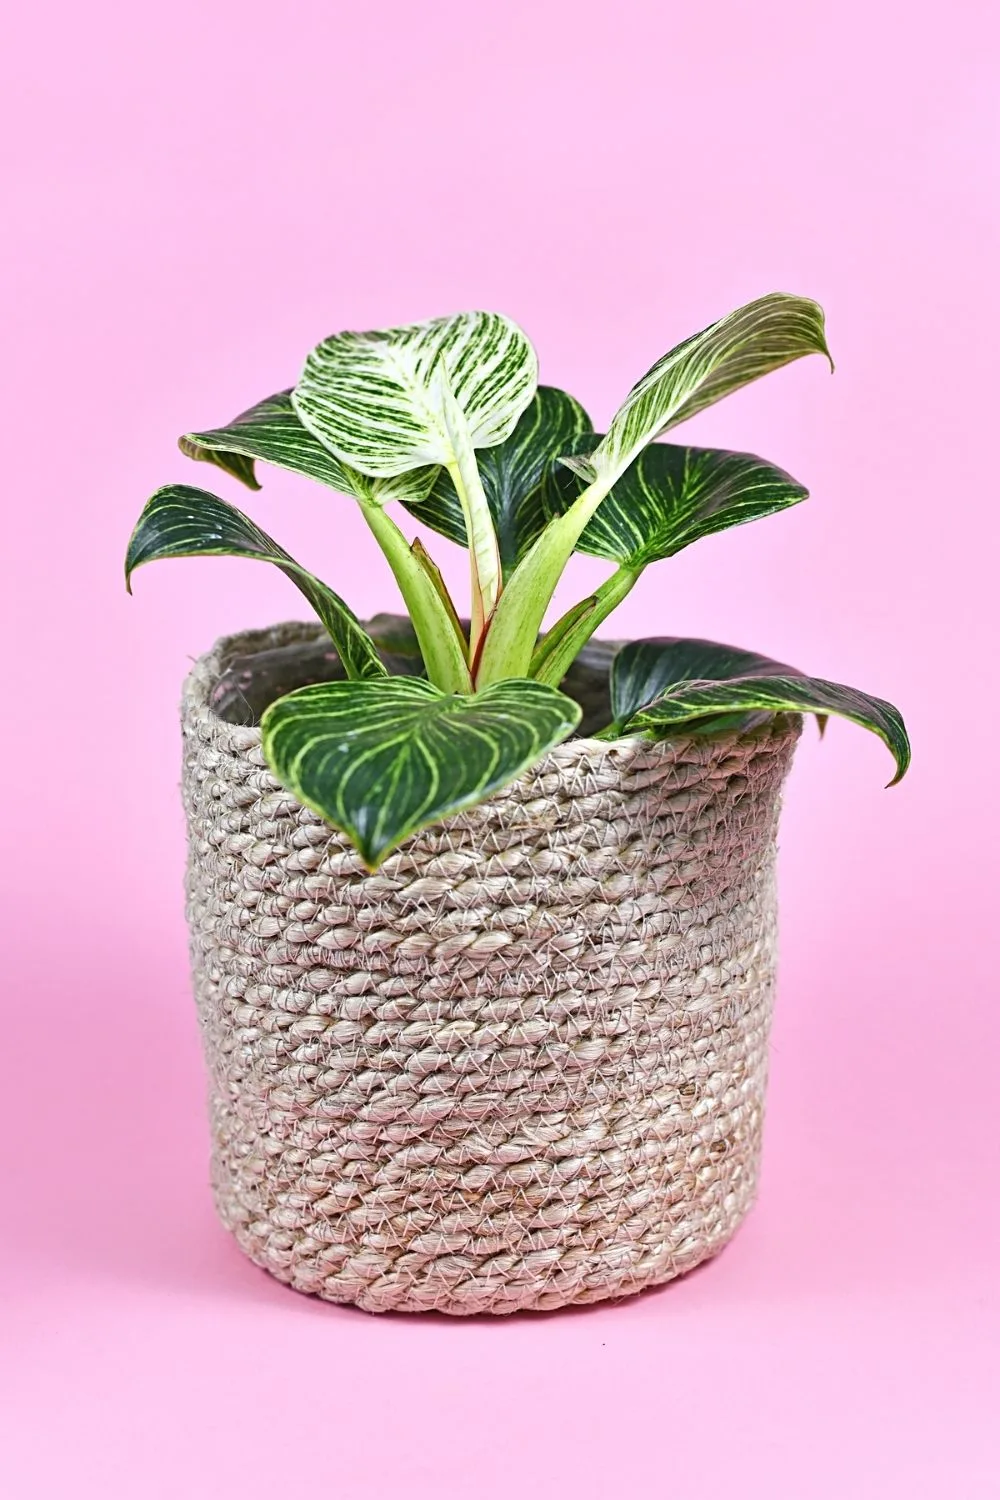 One tip to speed up your Philodendron Birkin's growth is to plant it in a flower pot